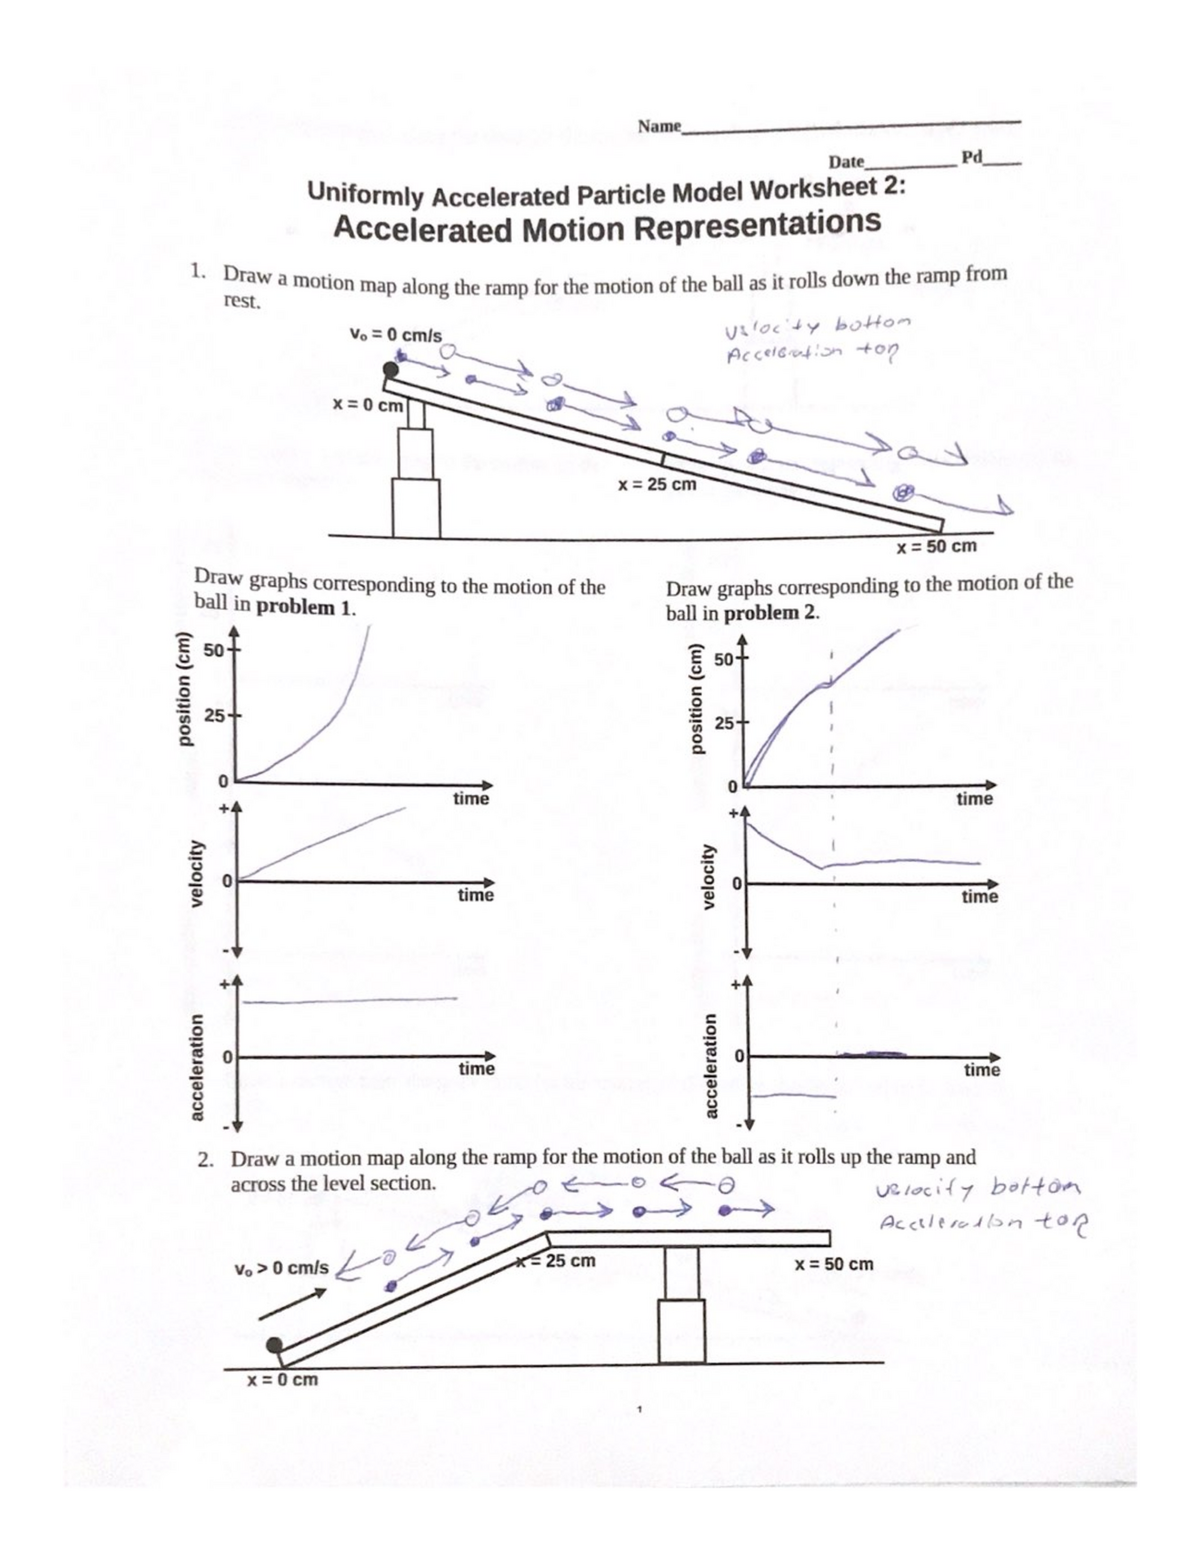 uniformly-accelerated-particle-model-worksheet-2-phy-241-studocu